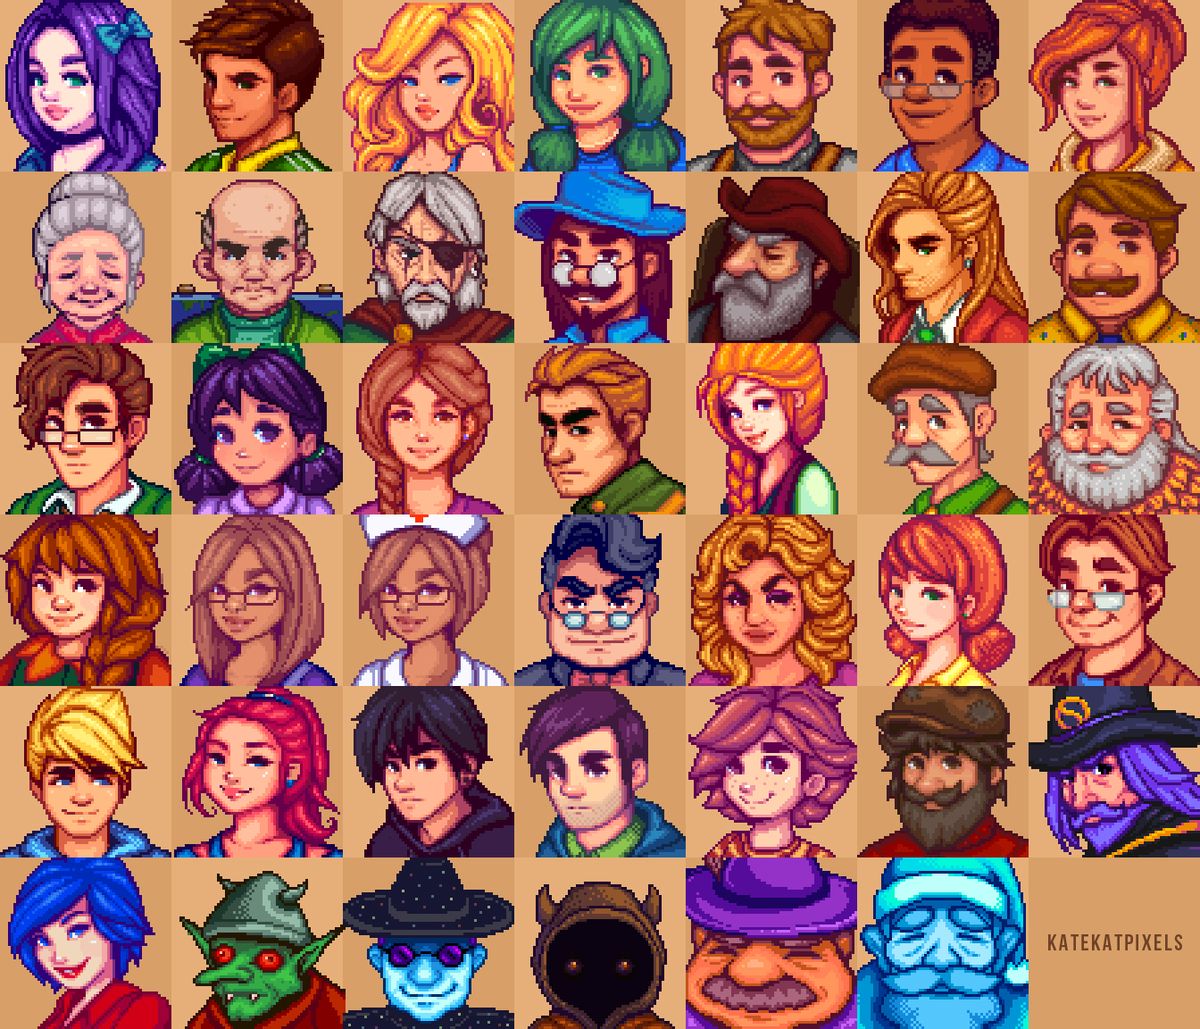 Stardew Valley portrait overhaul mod reworks all character expressions.